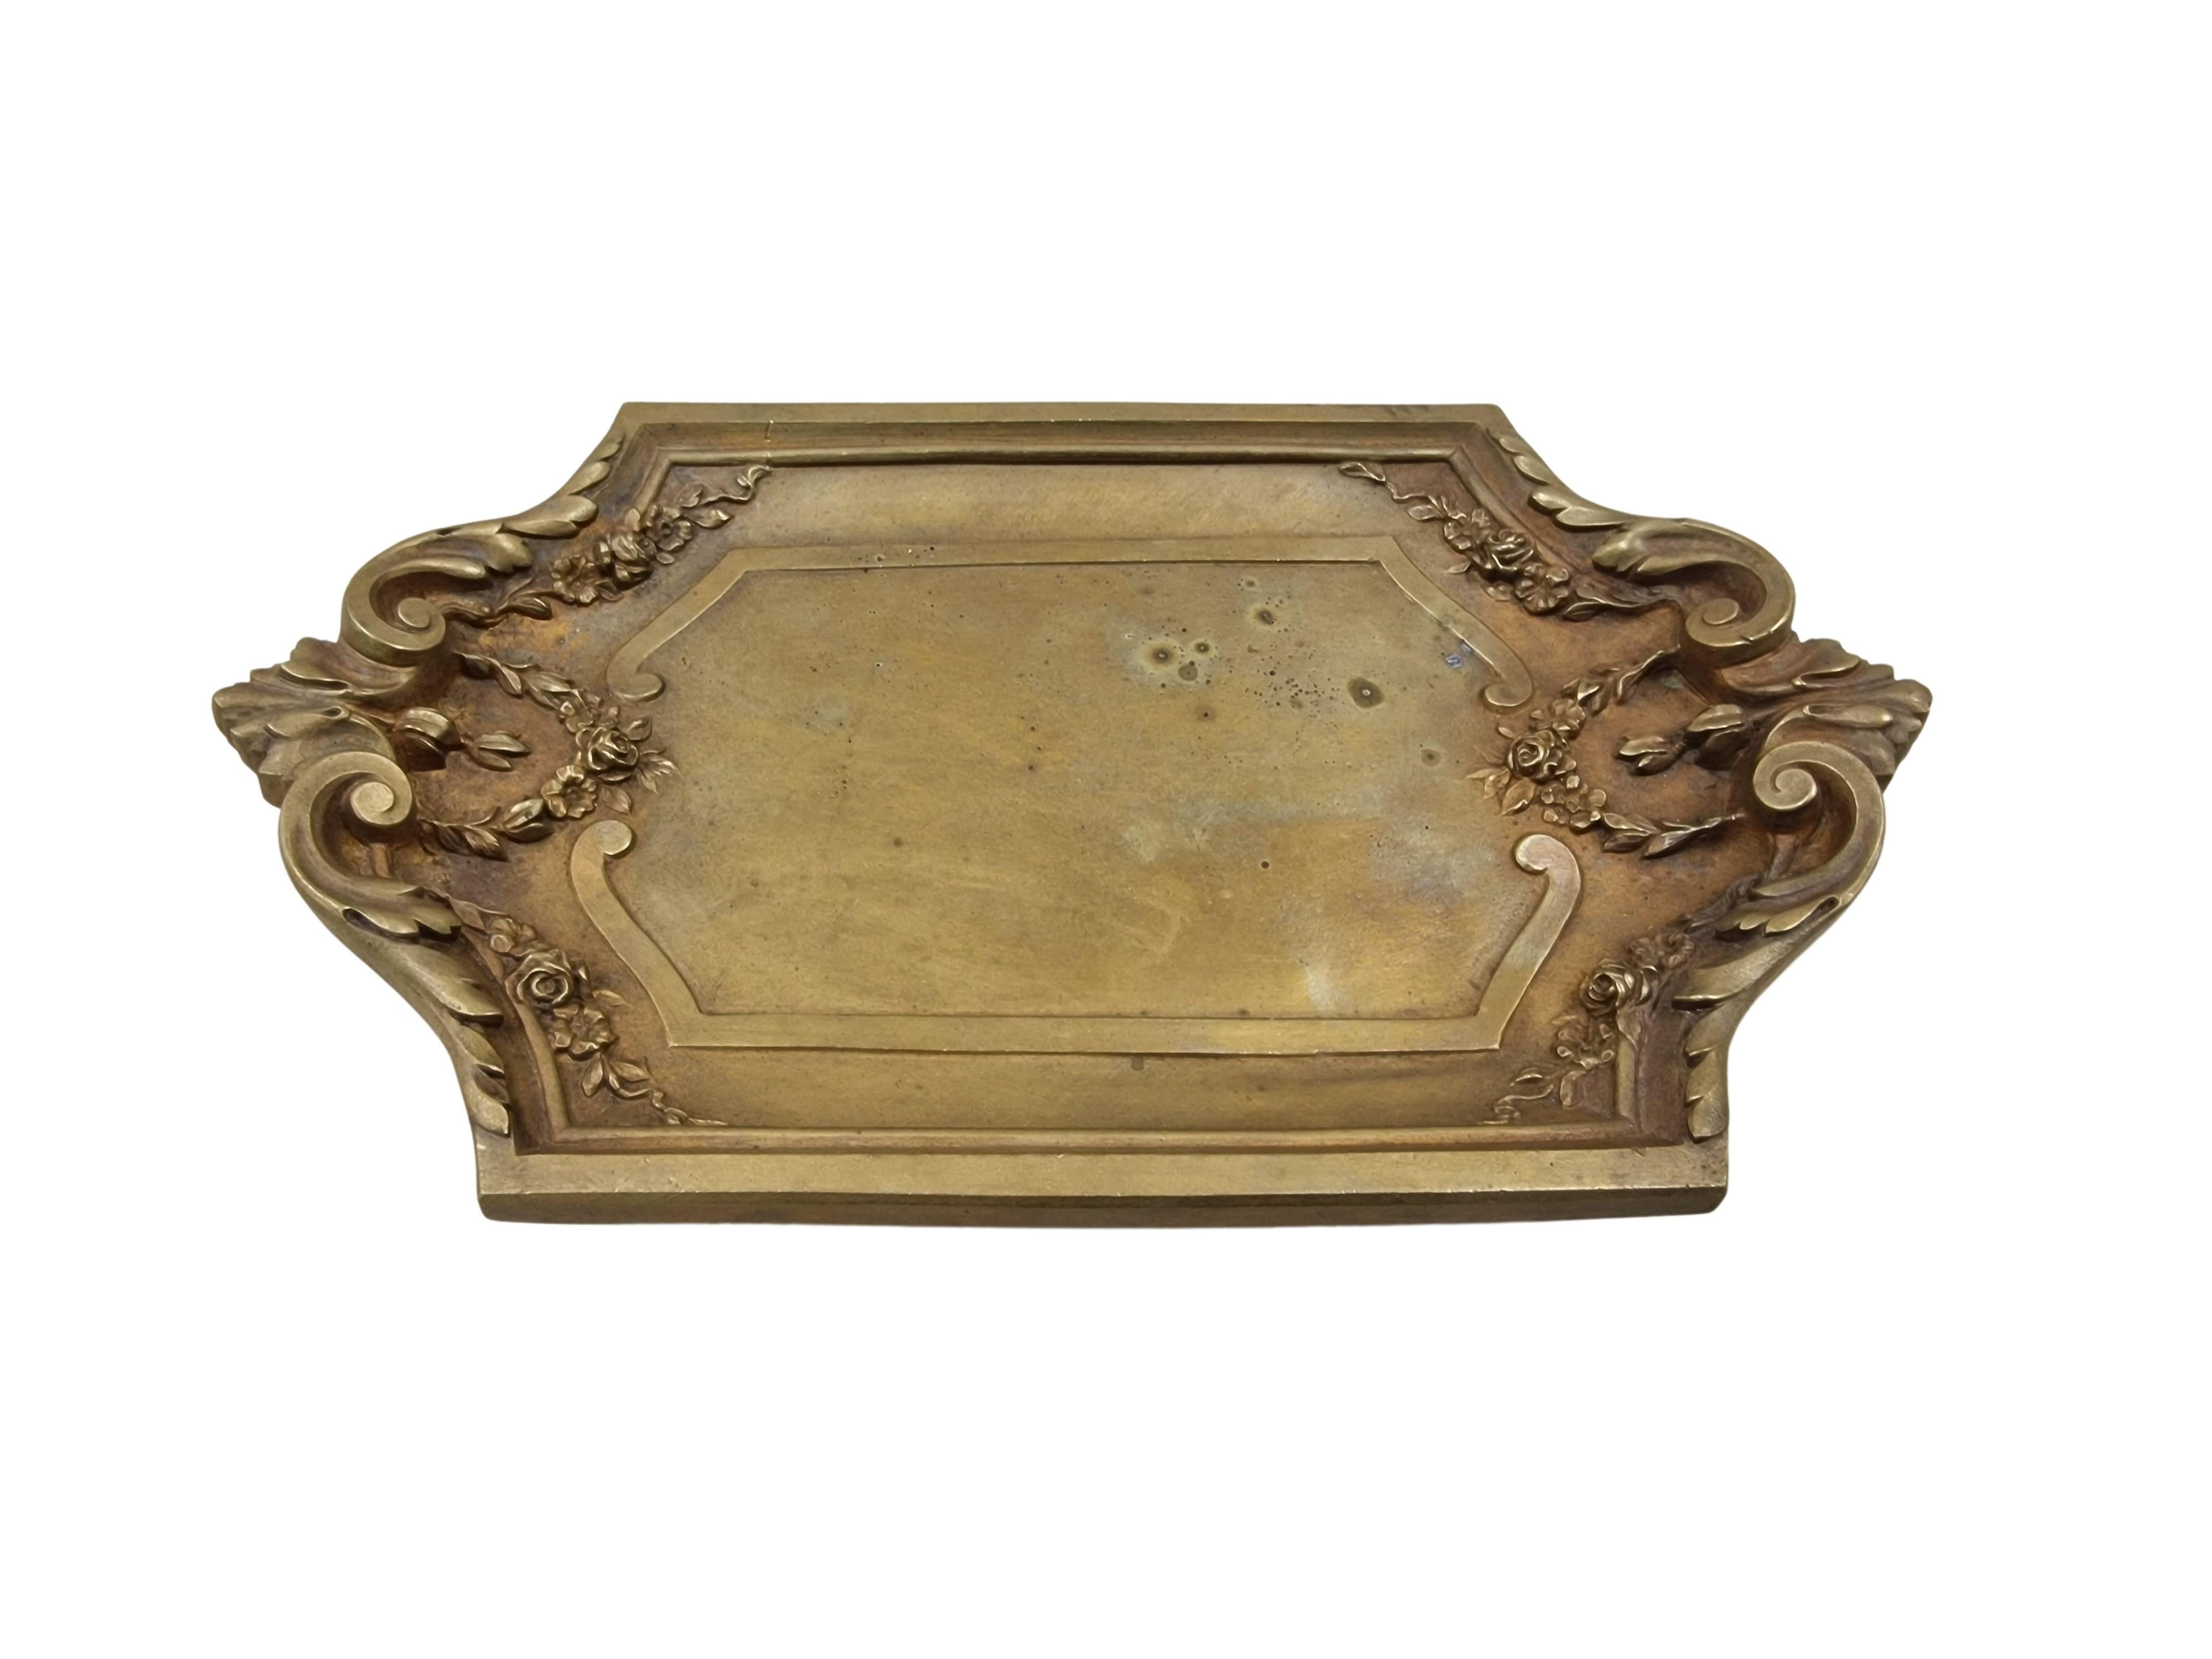 Wonderful business card tray, made out of solid bronze, an original of the Jugendstil - Art Nouveau period, made around 1900. 

This nice historical object has a rectangular shape and is built up in steps. On the sides are wonderfully crafted flower